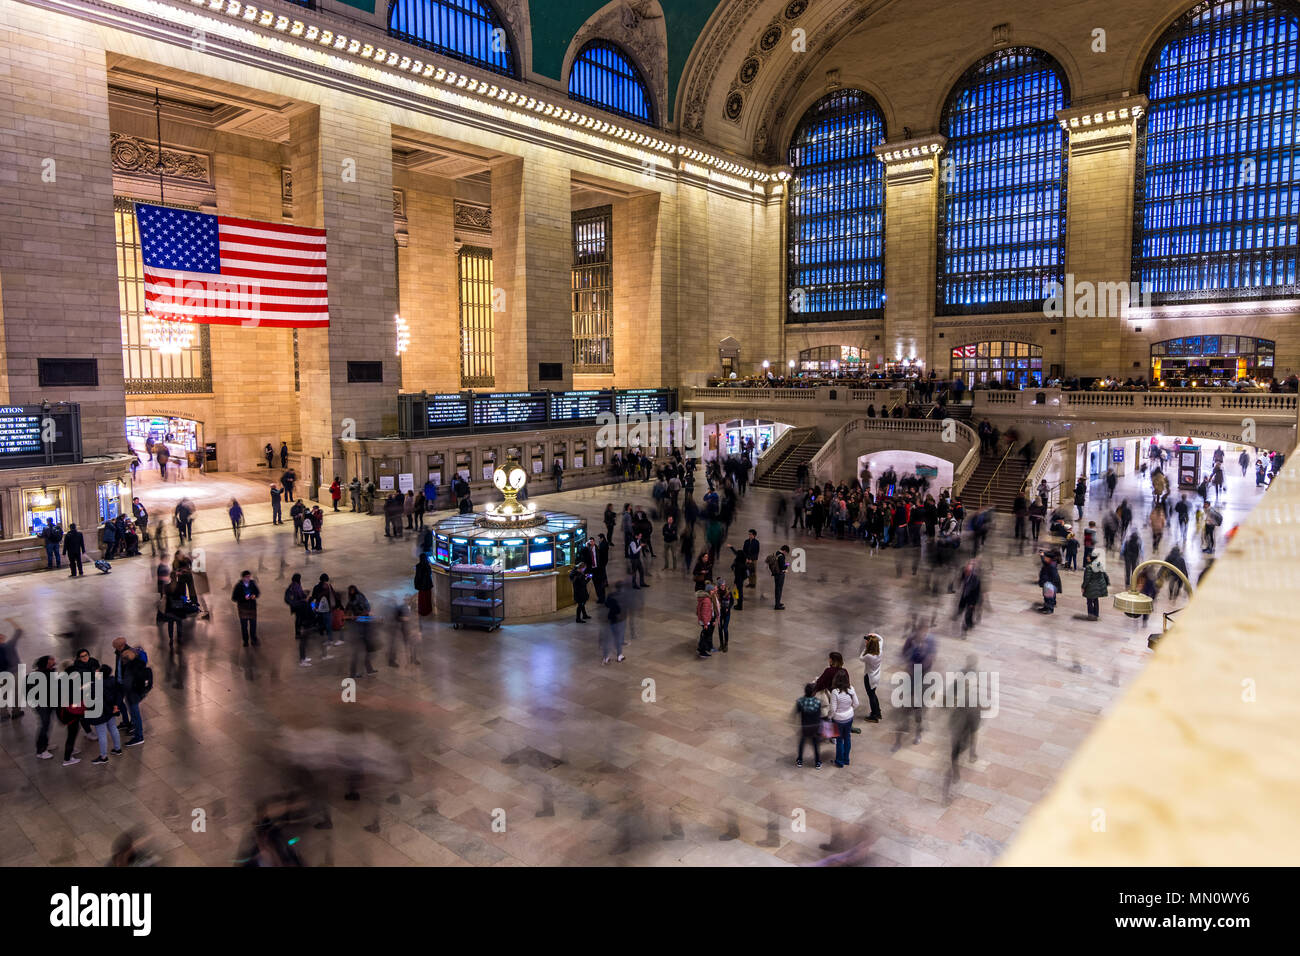 New York, US - March 28, 2018: Commuters and tourists during rush hour at the iconic Central Station in New York Stock Photo